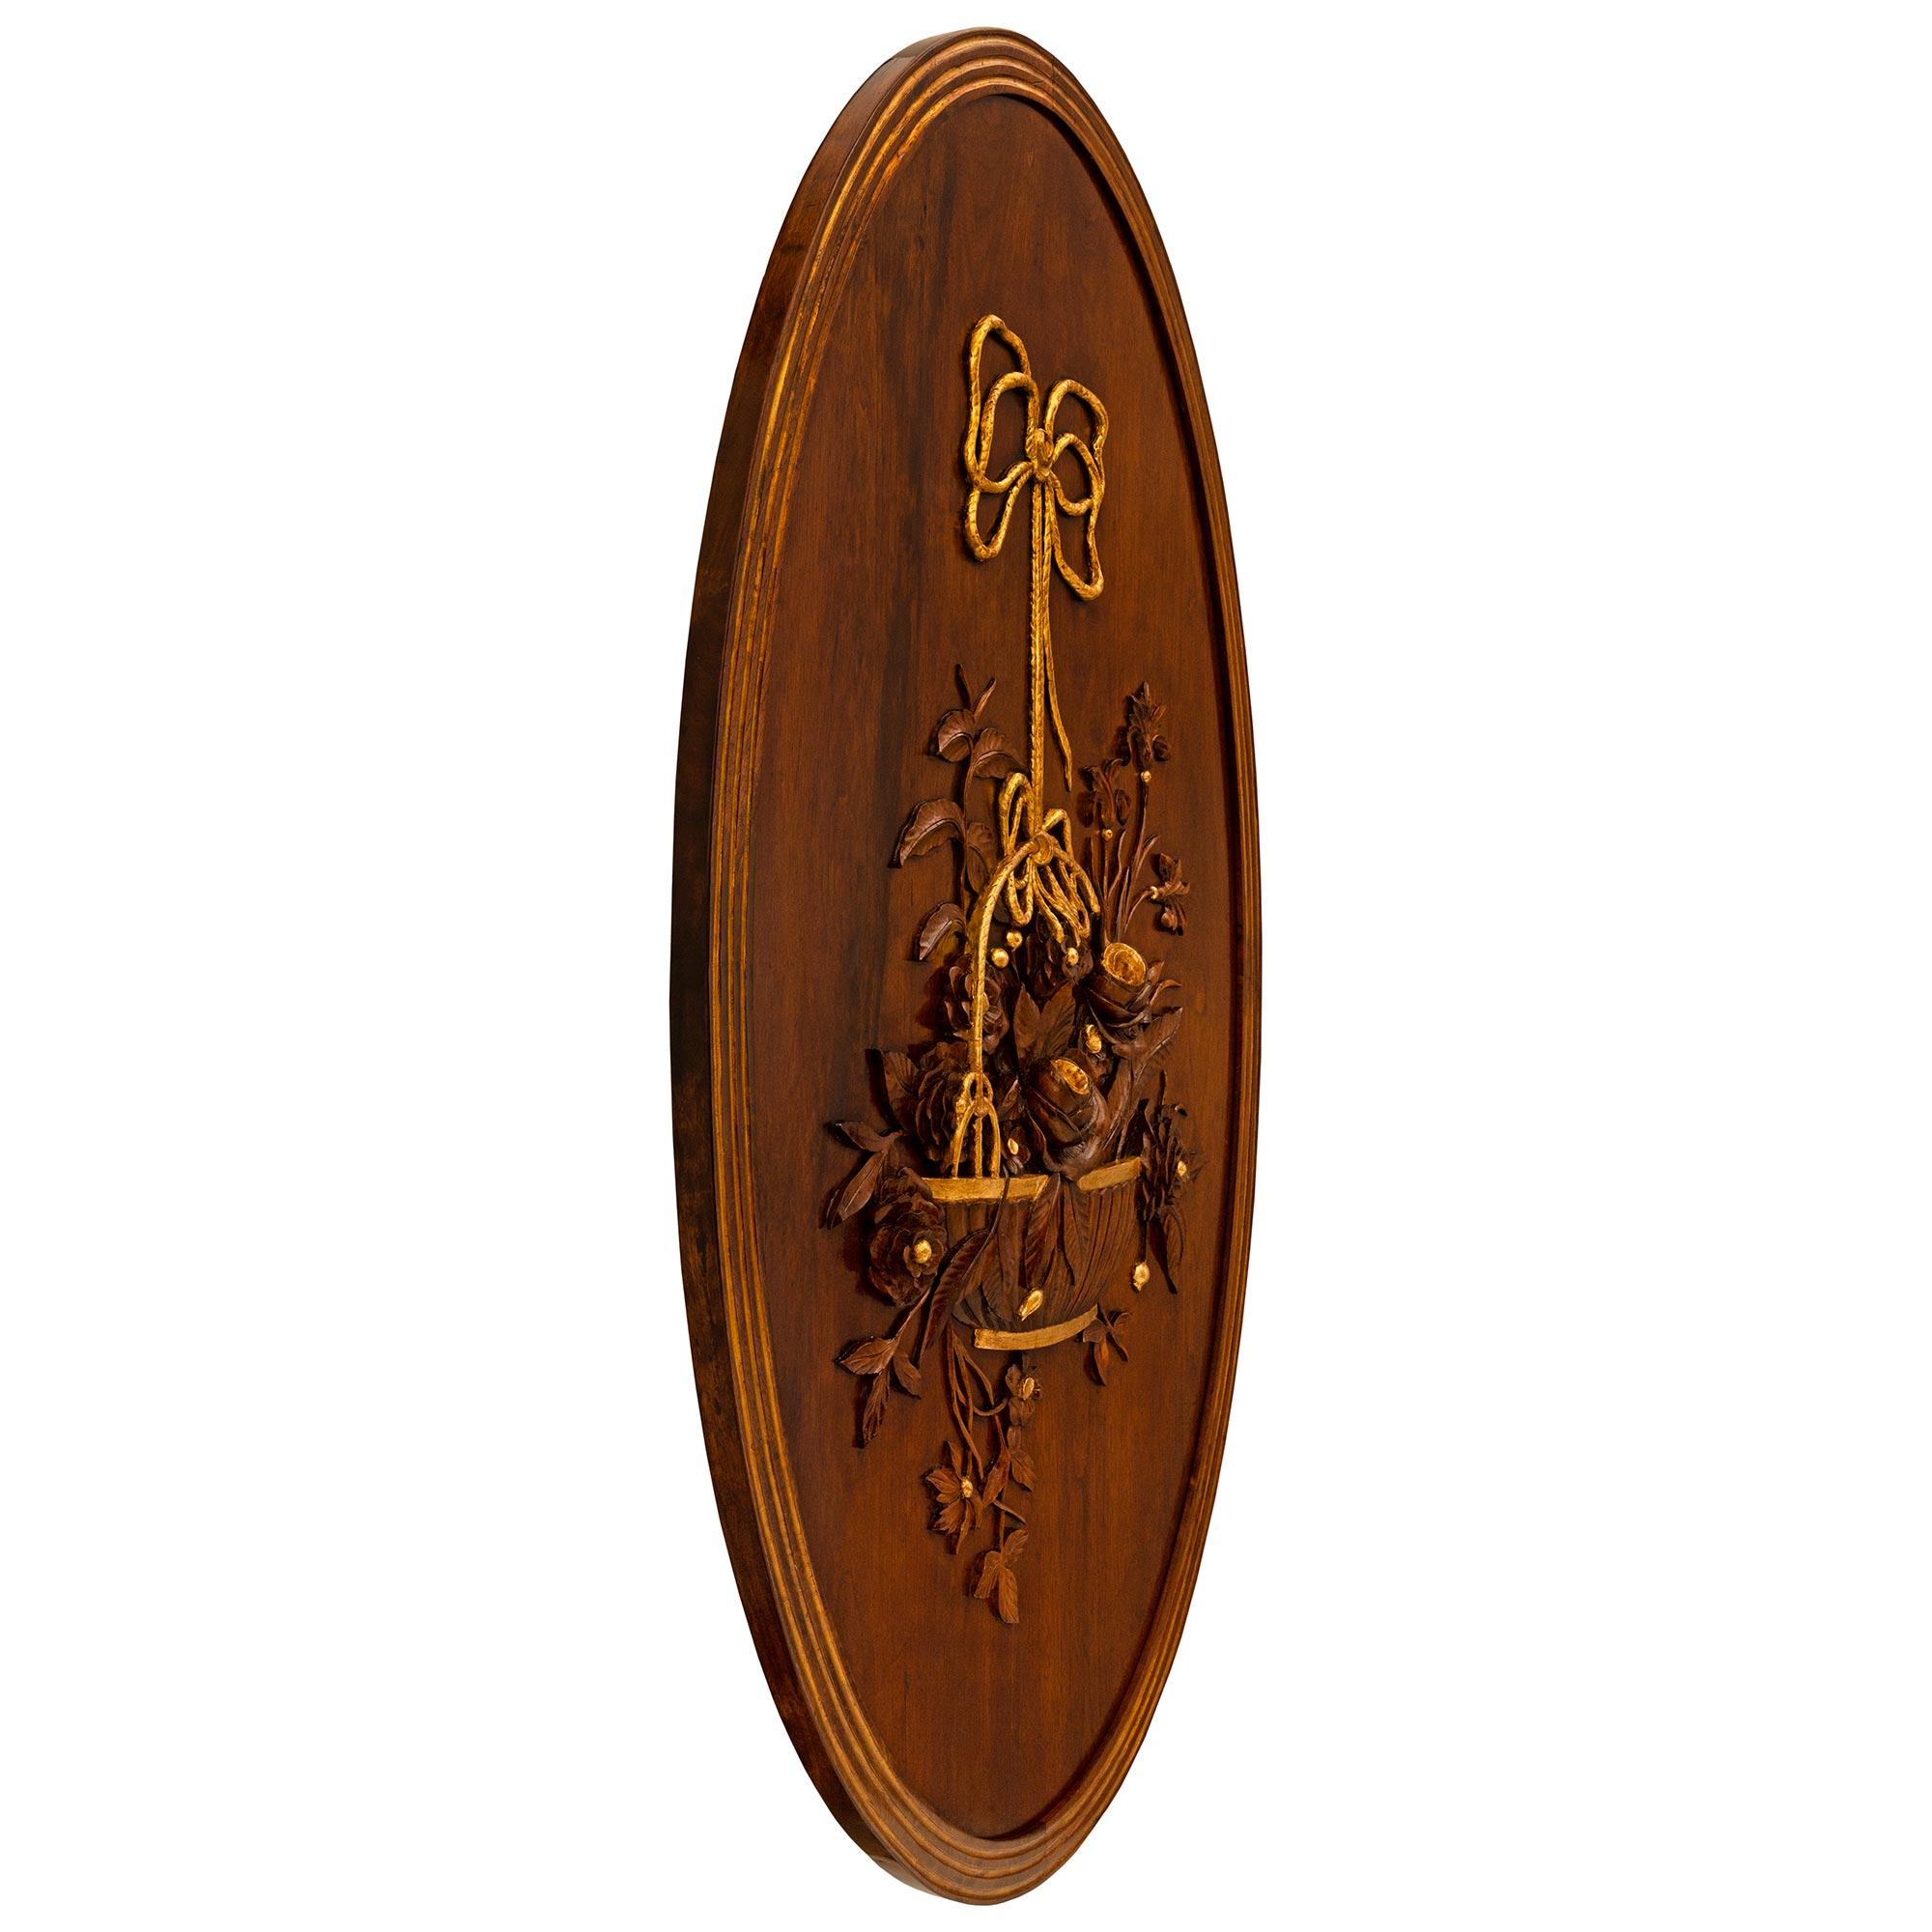 A charming and extremely decorative French 19th century Louis XVI st. Walnut and Giltwood wall decor/plaque. The large scale oval plaque displays an elegant frame with Giltwood fluted bands continuing around the entirety of the frame and centering